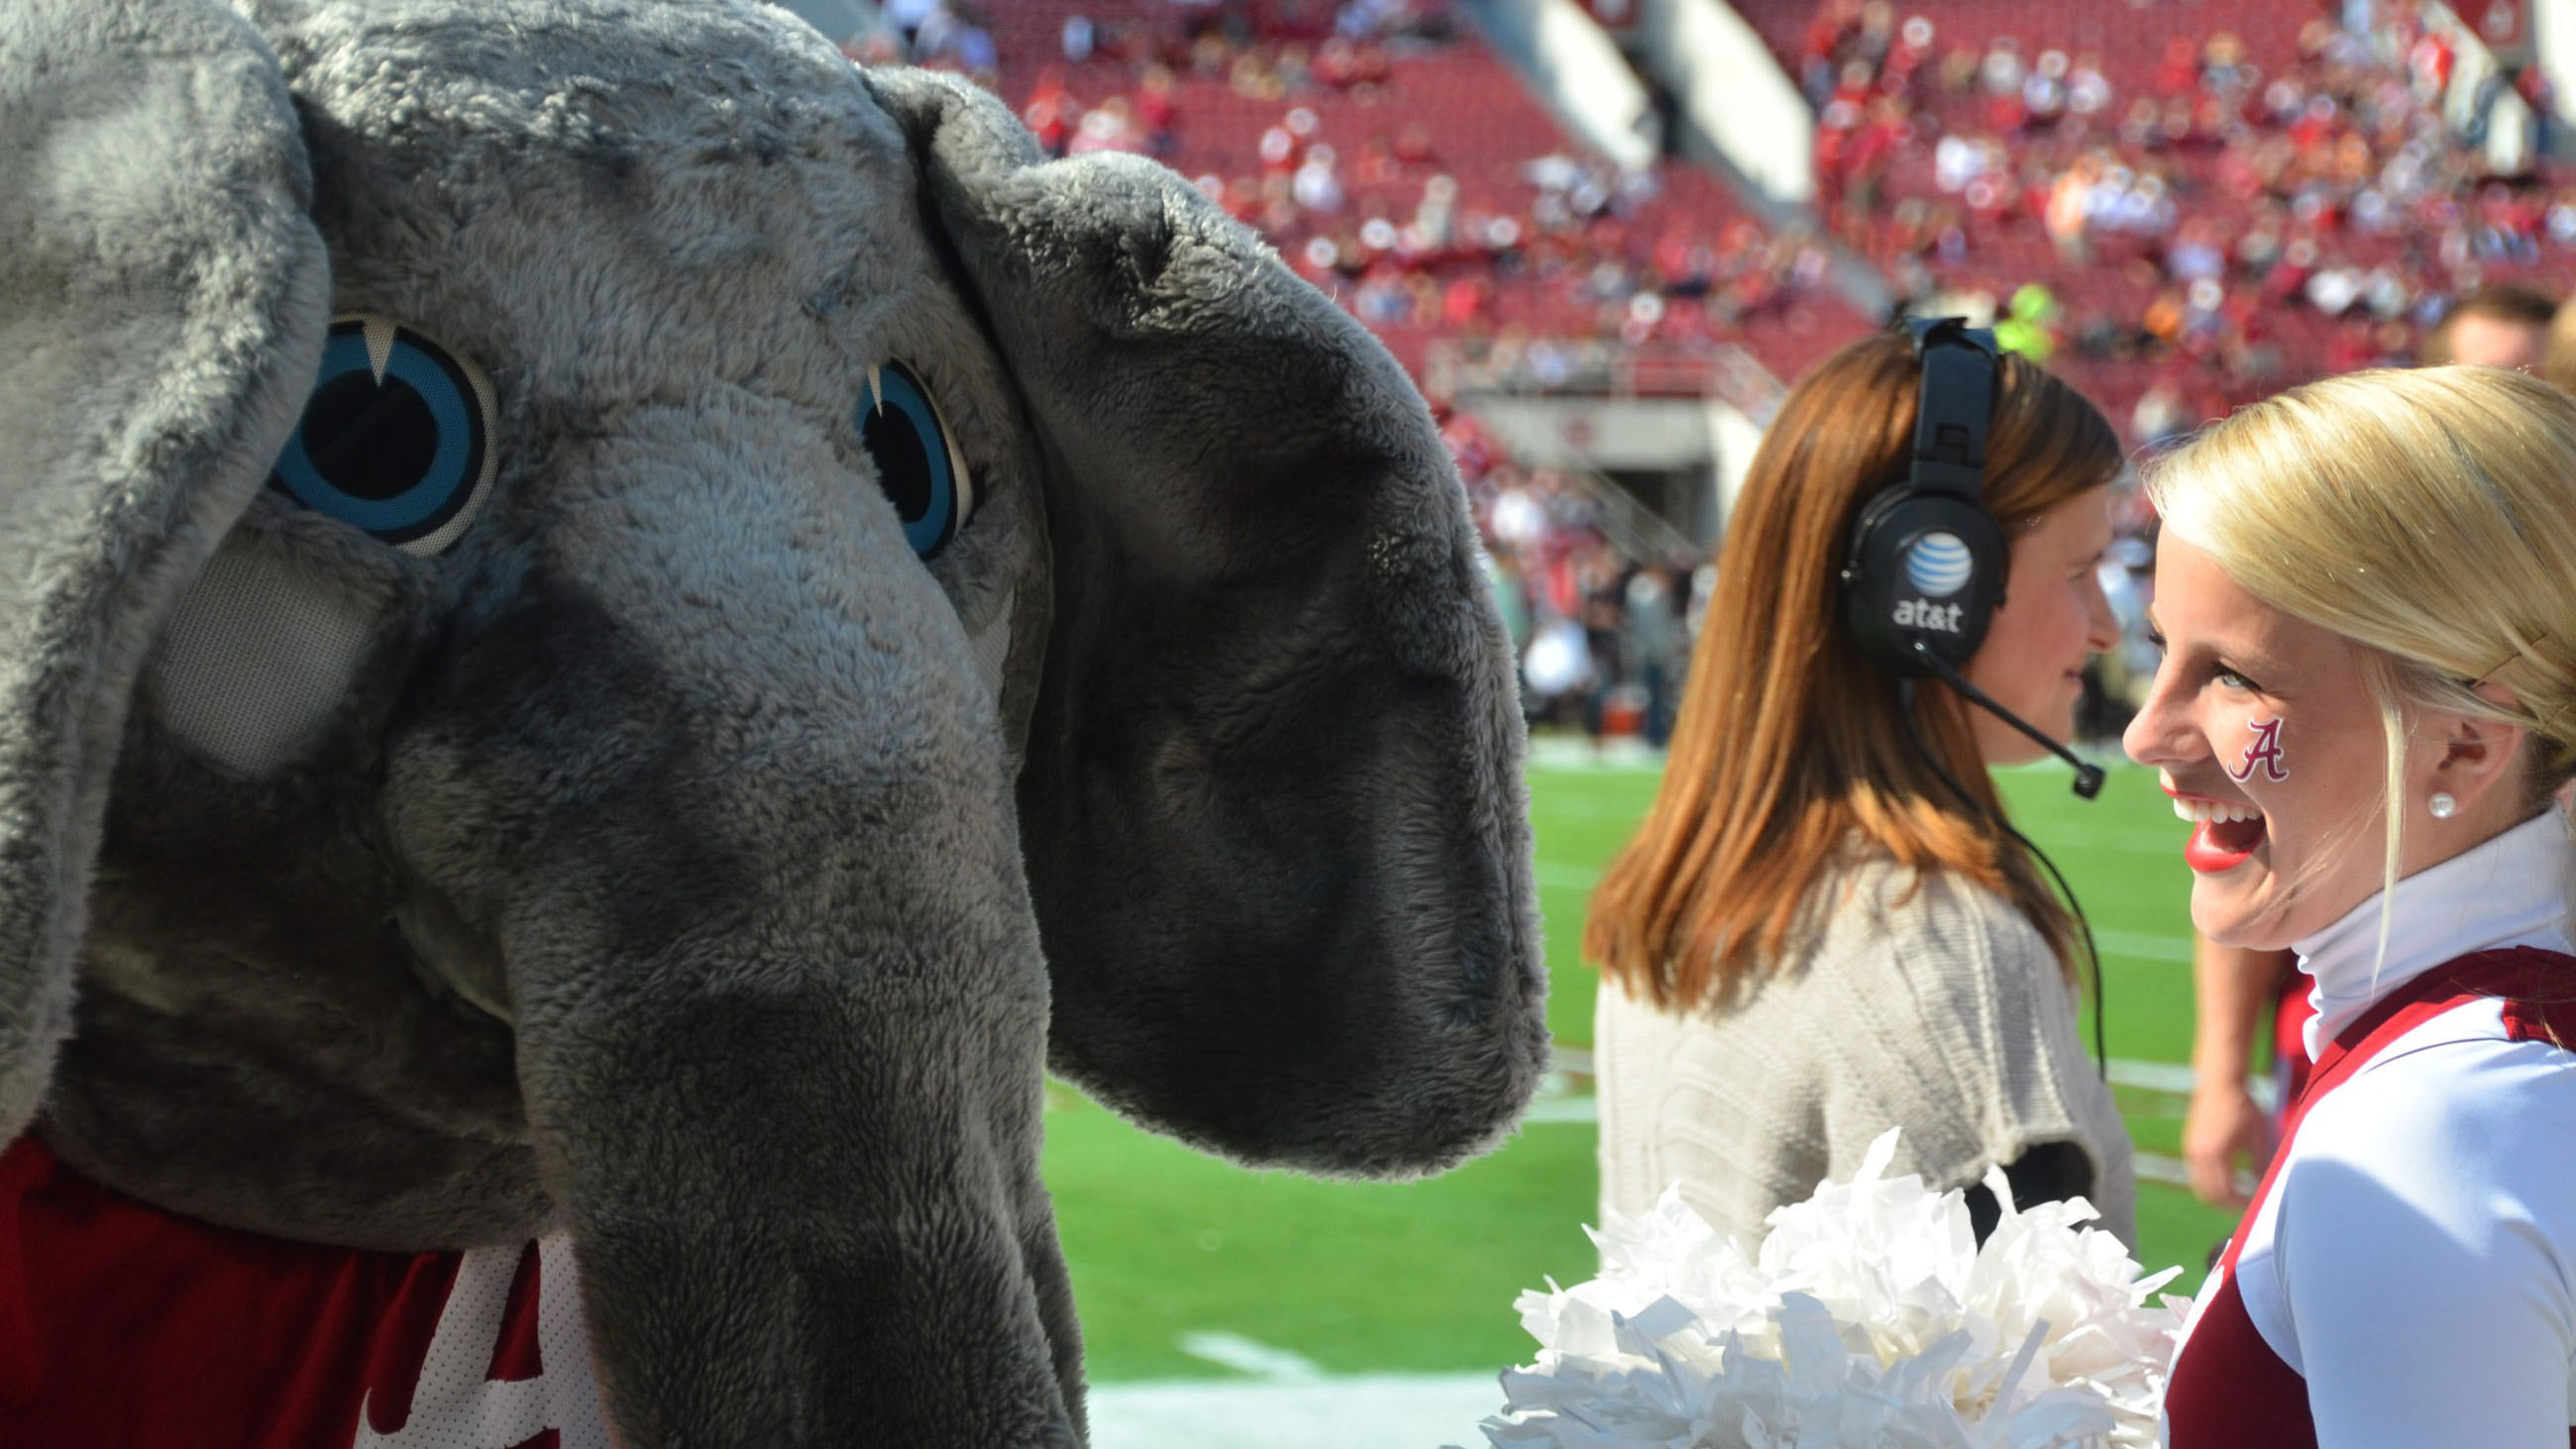 The University of Alabama's team mascot, the elephant, is now being used to help raise awareness (and funding) for elephant conservation. Does that work?